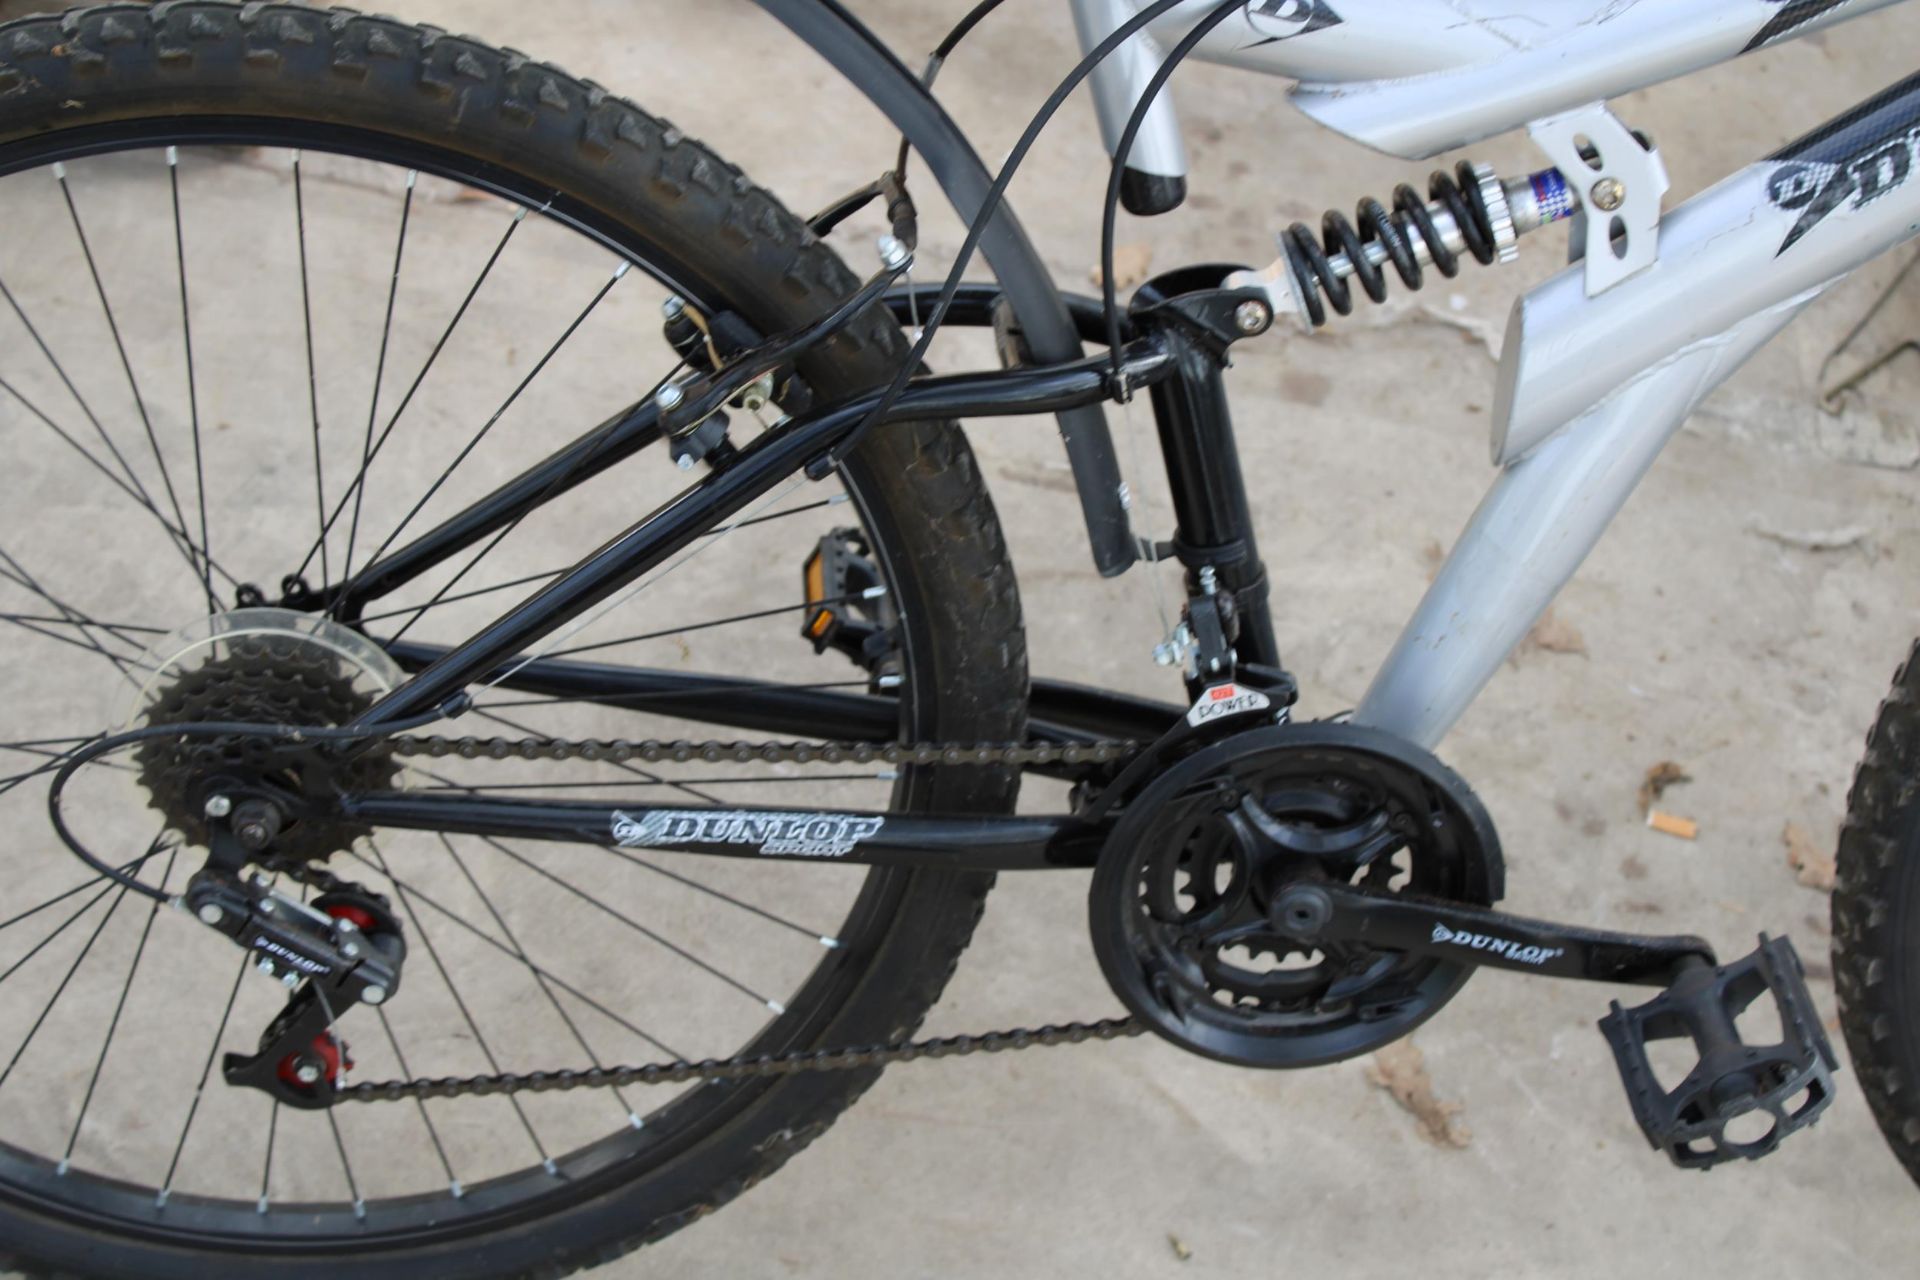 A DUNLOP SPECIAL EDITION MOUNTAIN BIKE WITH FRONT AND REAR SUSPENSION AND 18 SPEED GEAR SYSTEM - Bild 3 aus 4